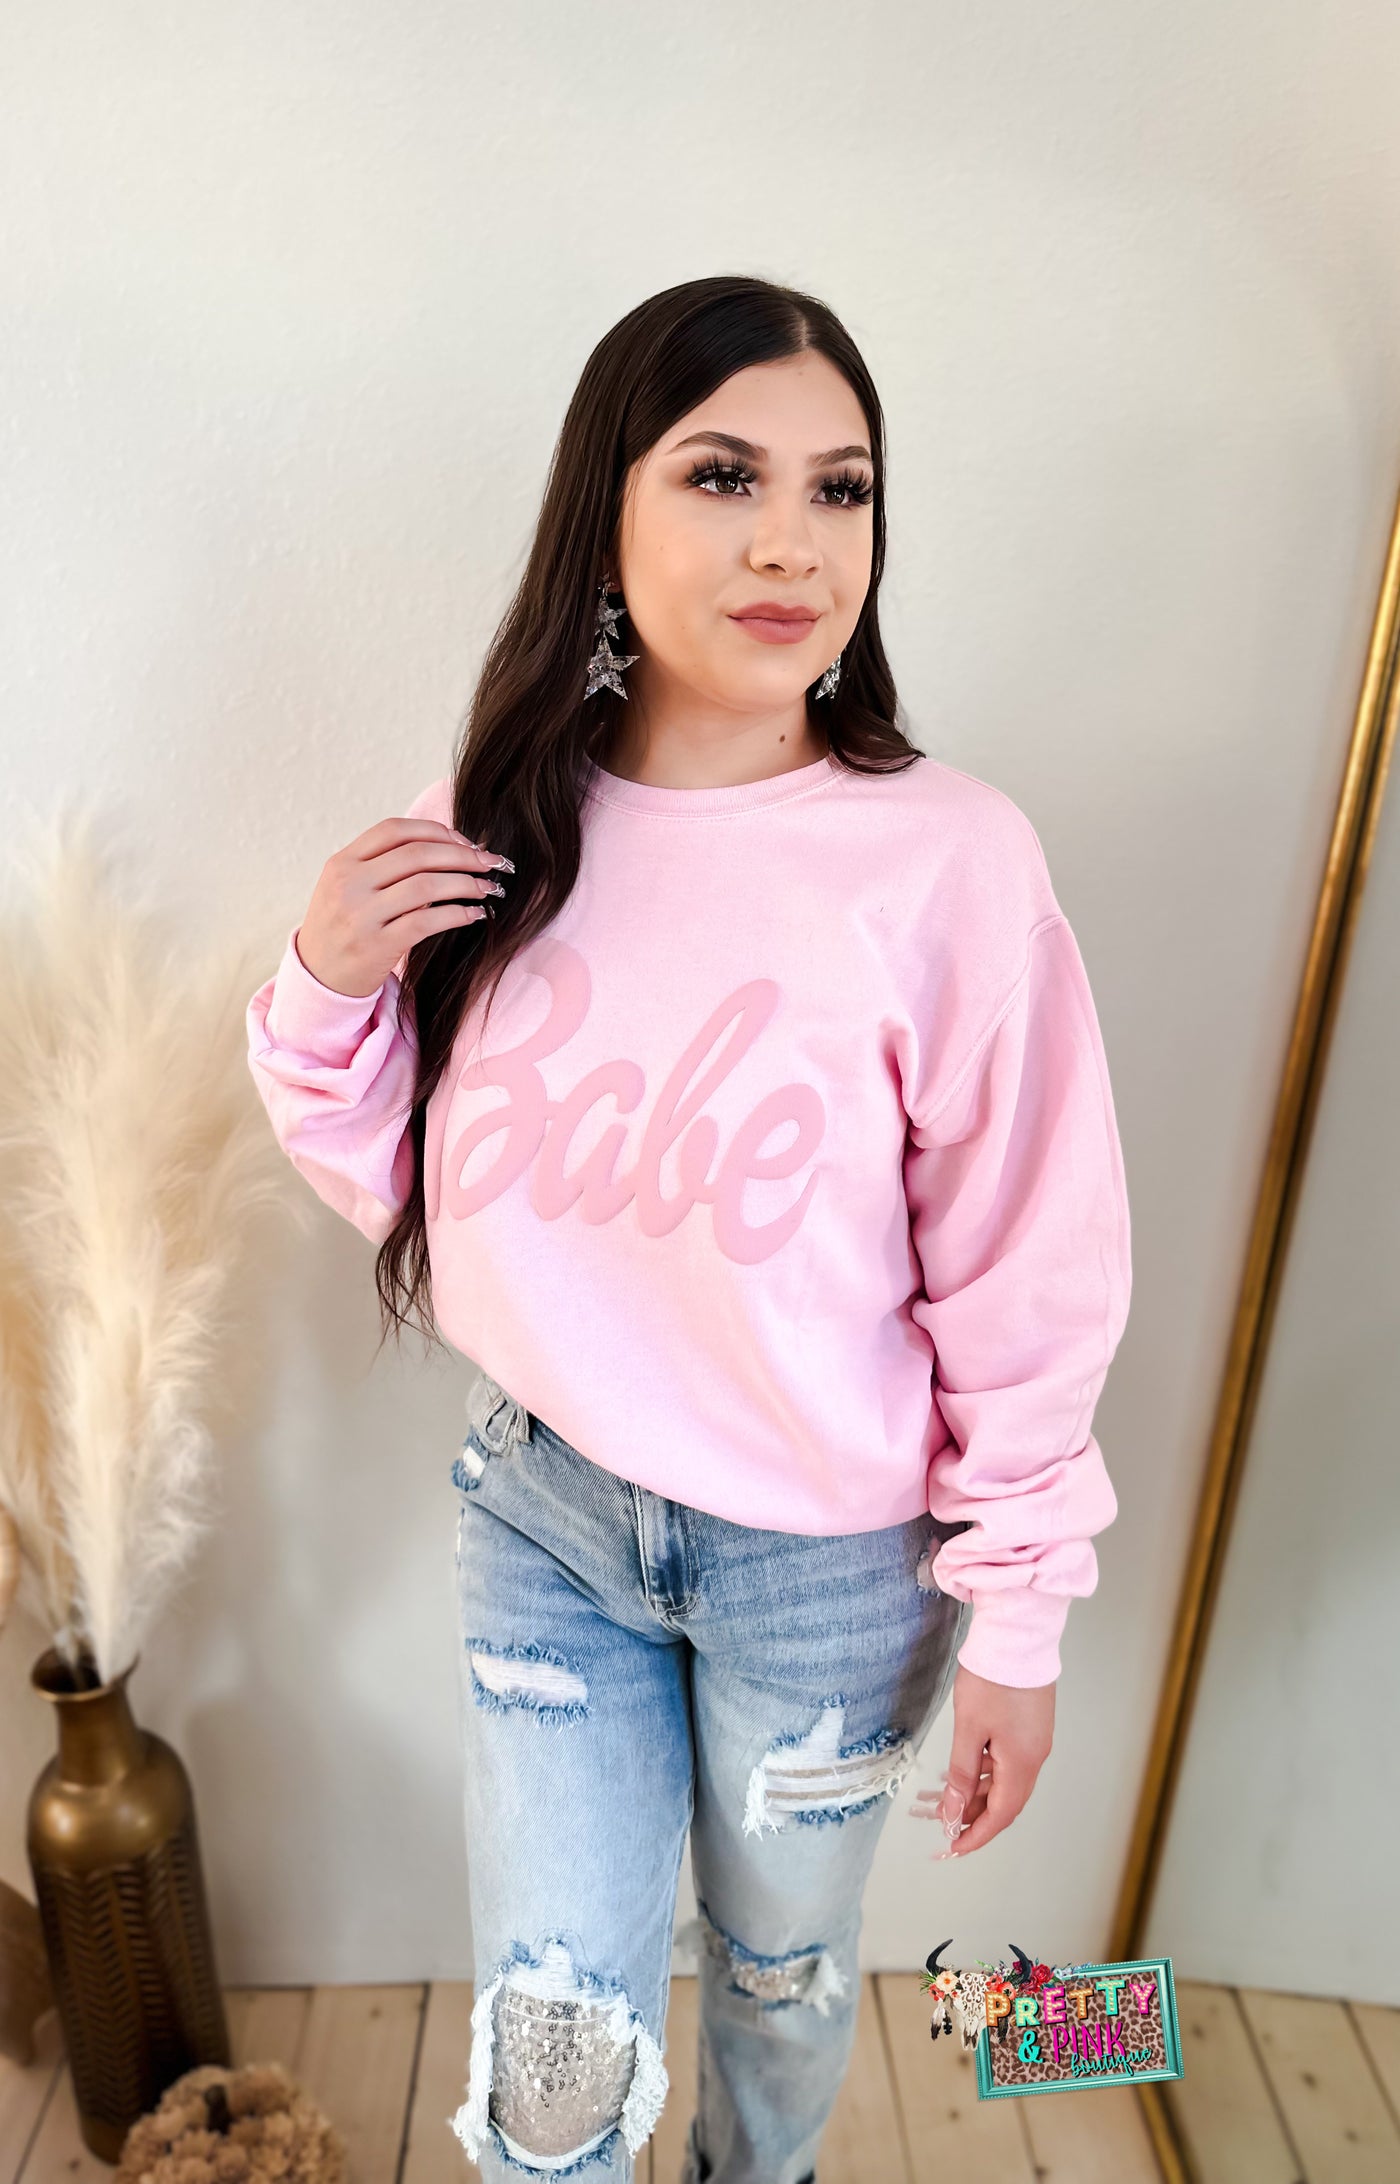 Babe Pink Sweater